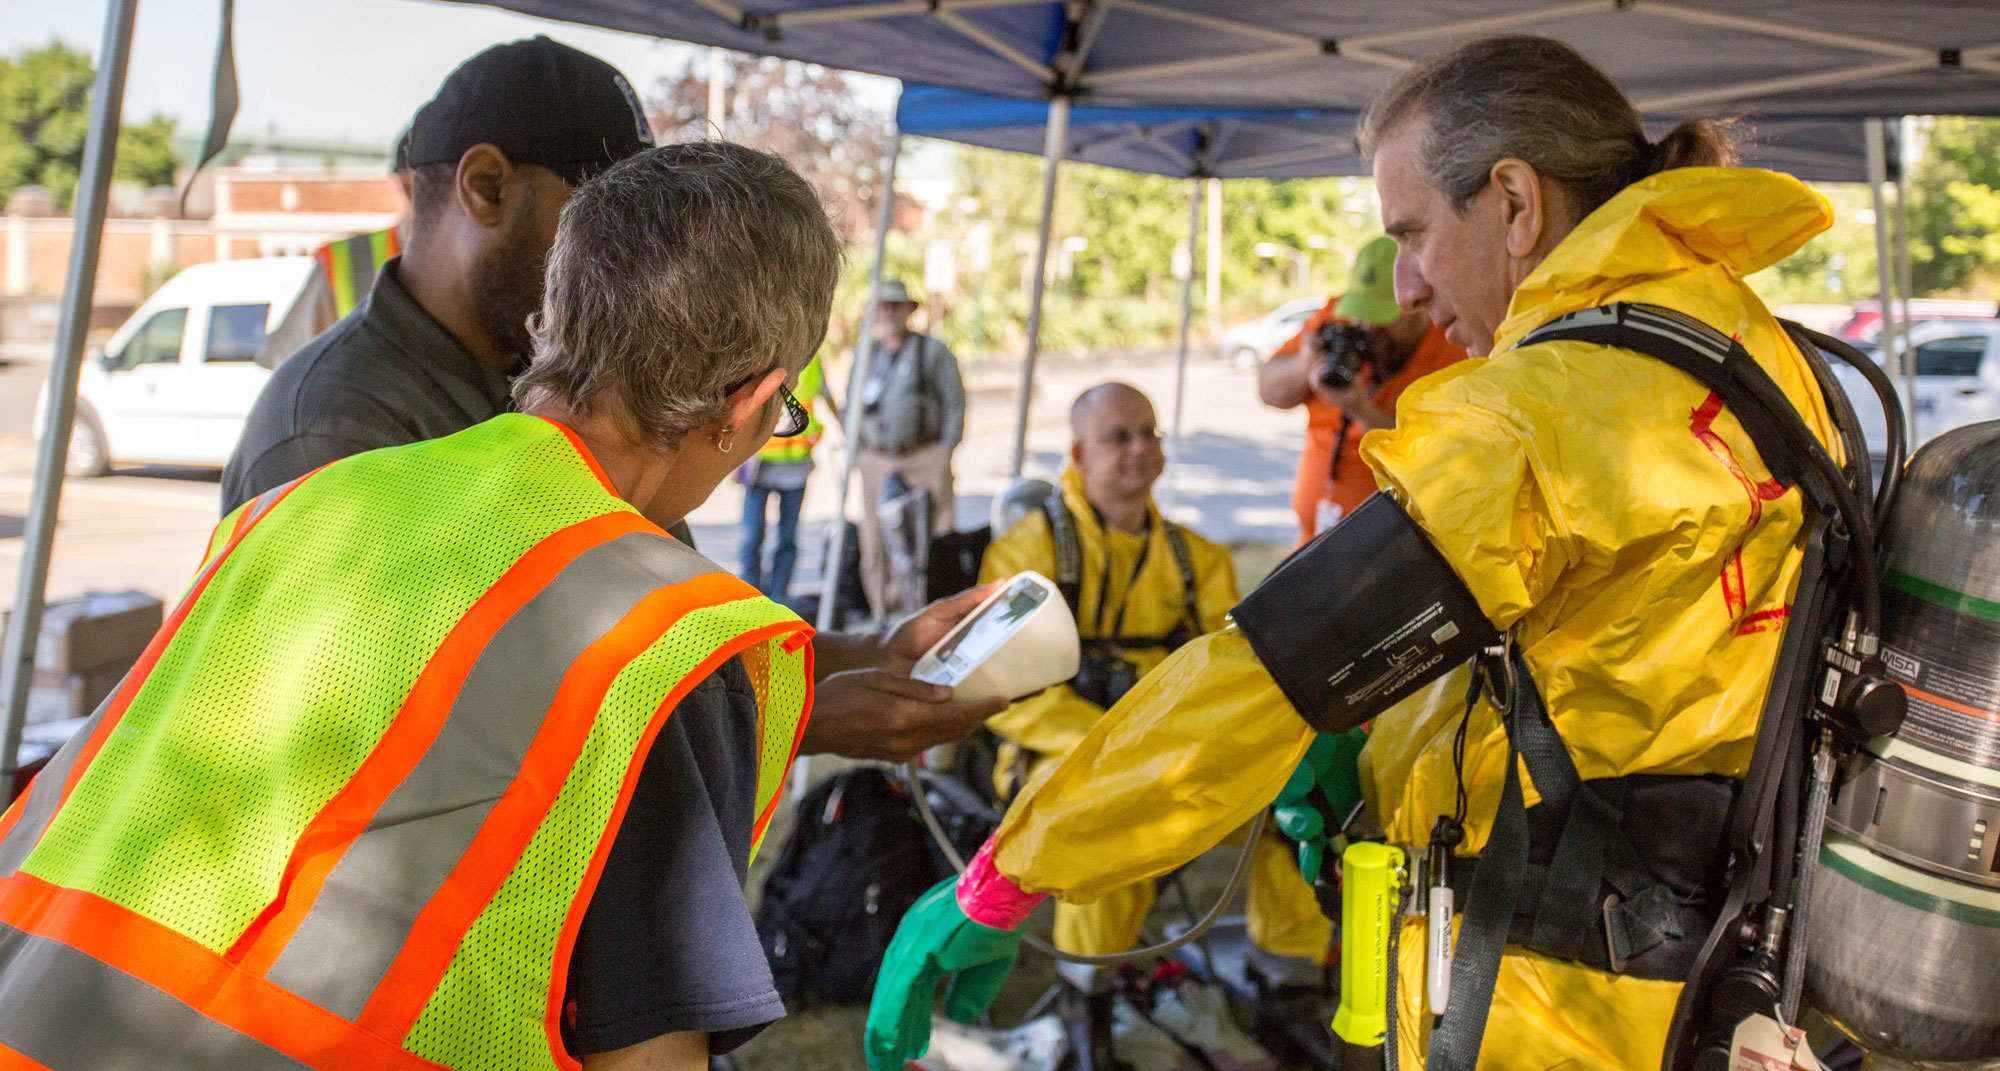 Emergency response teams gear up in hazmat suits for the Cascadia Rising earthquake drill